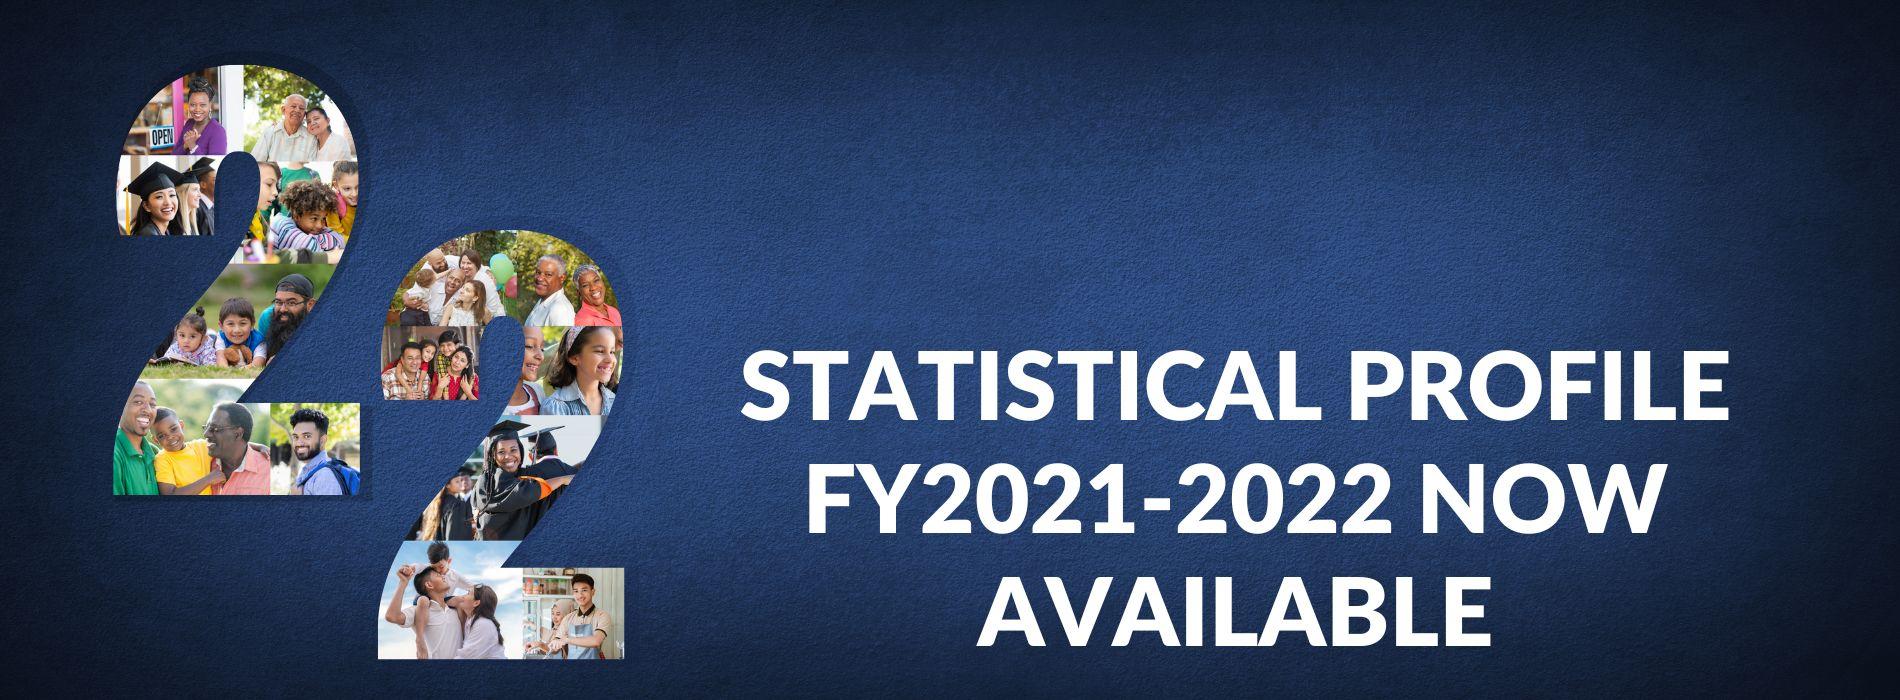 Statistical Profile Released